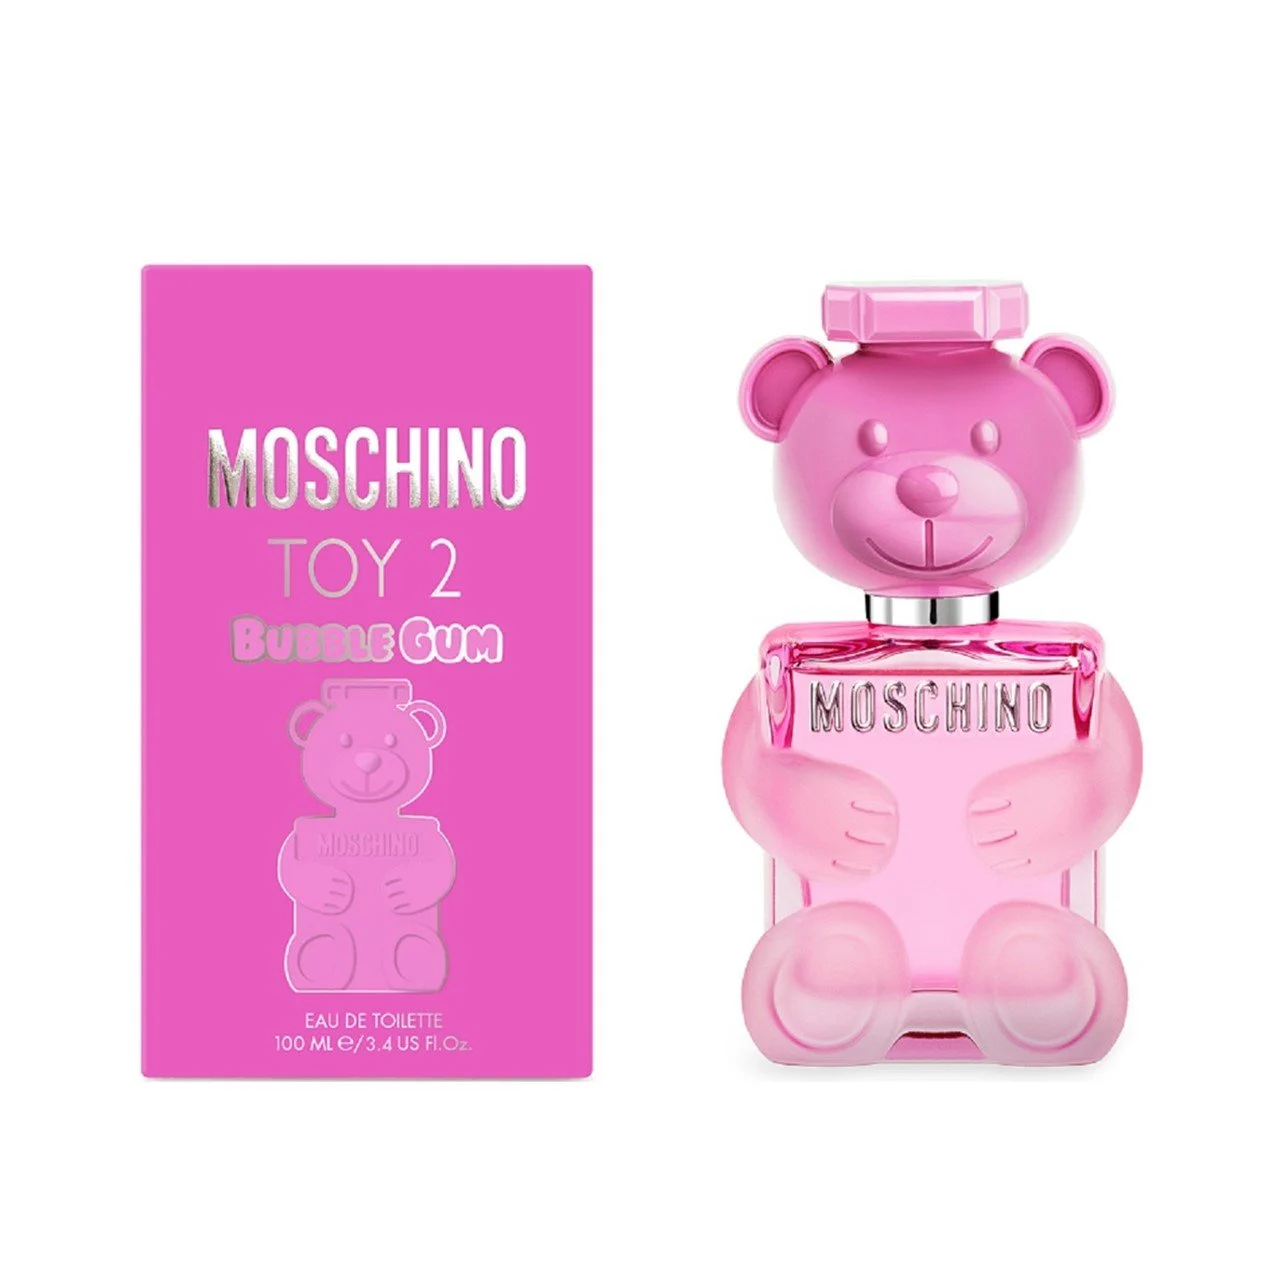 Moschino Toy 2 Bubble Gum Para Mujeres